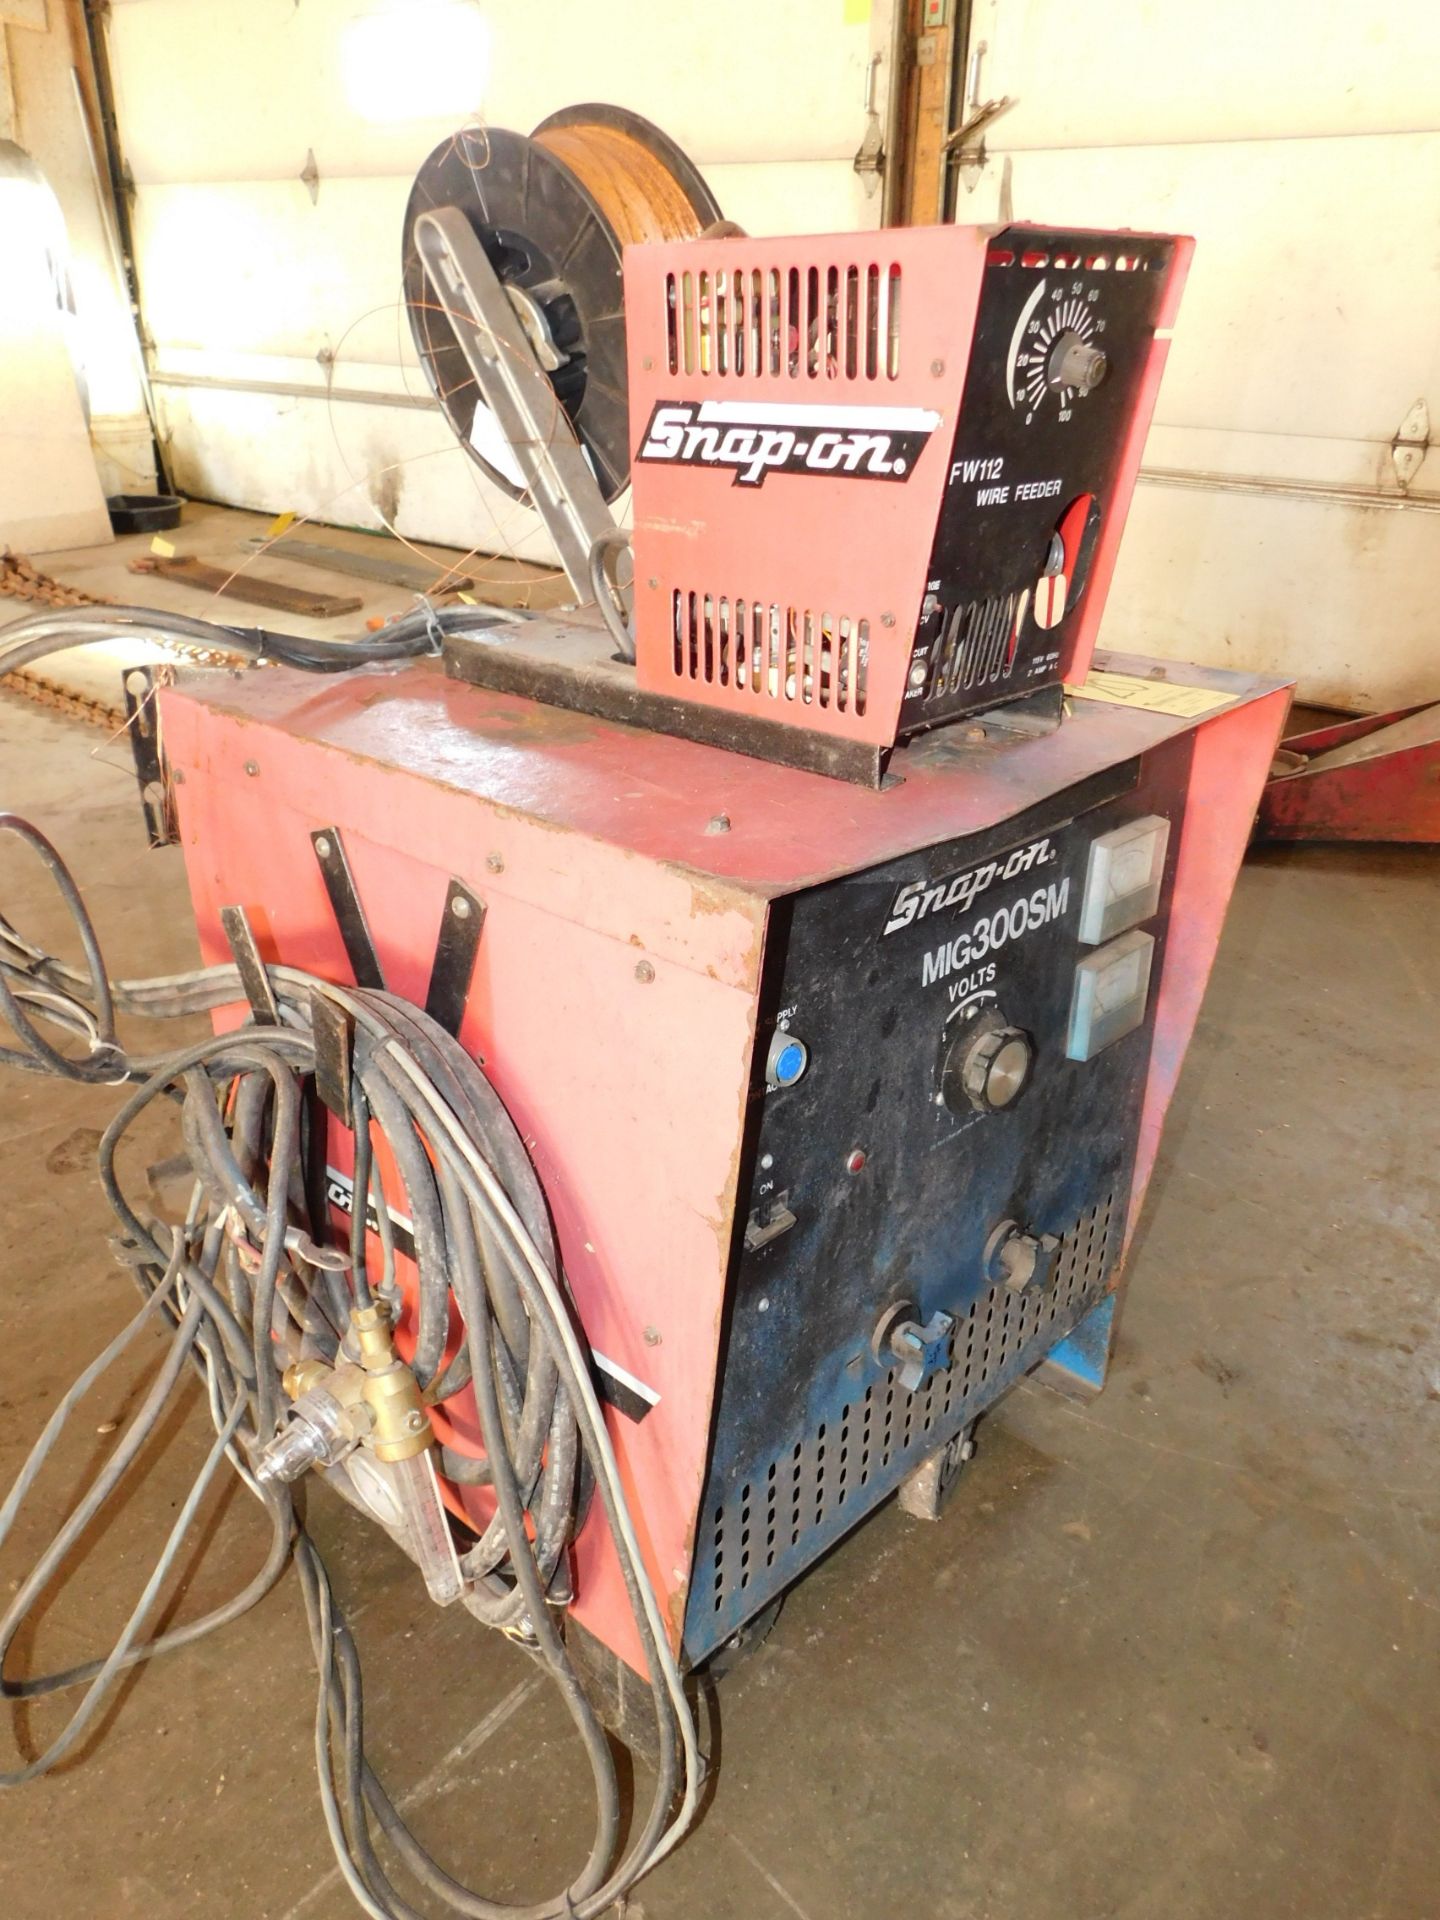 Snap-On Model MIG 300 SM Mig welder with Snap-On Model FW112 wire feeder - Image 3 of 4